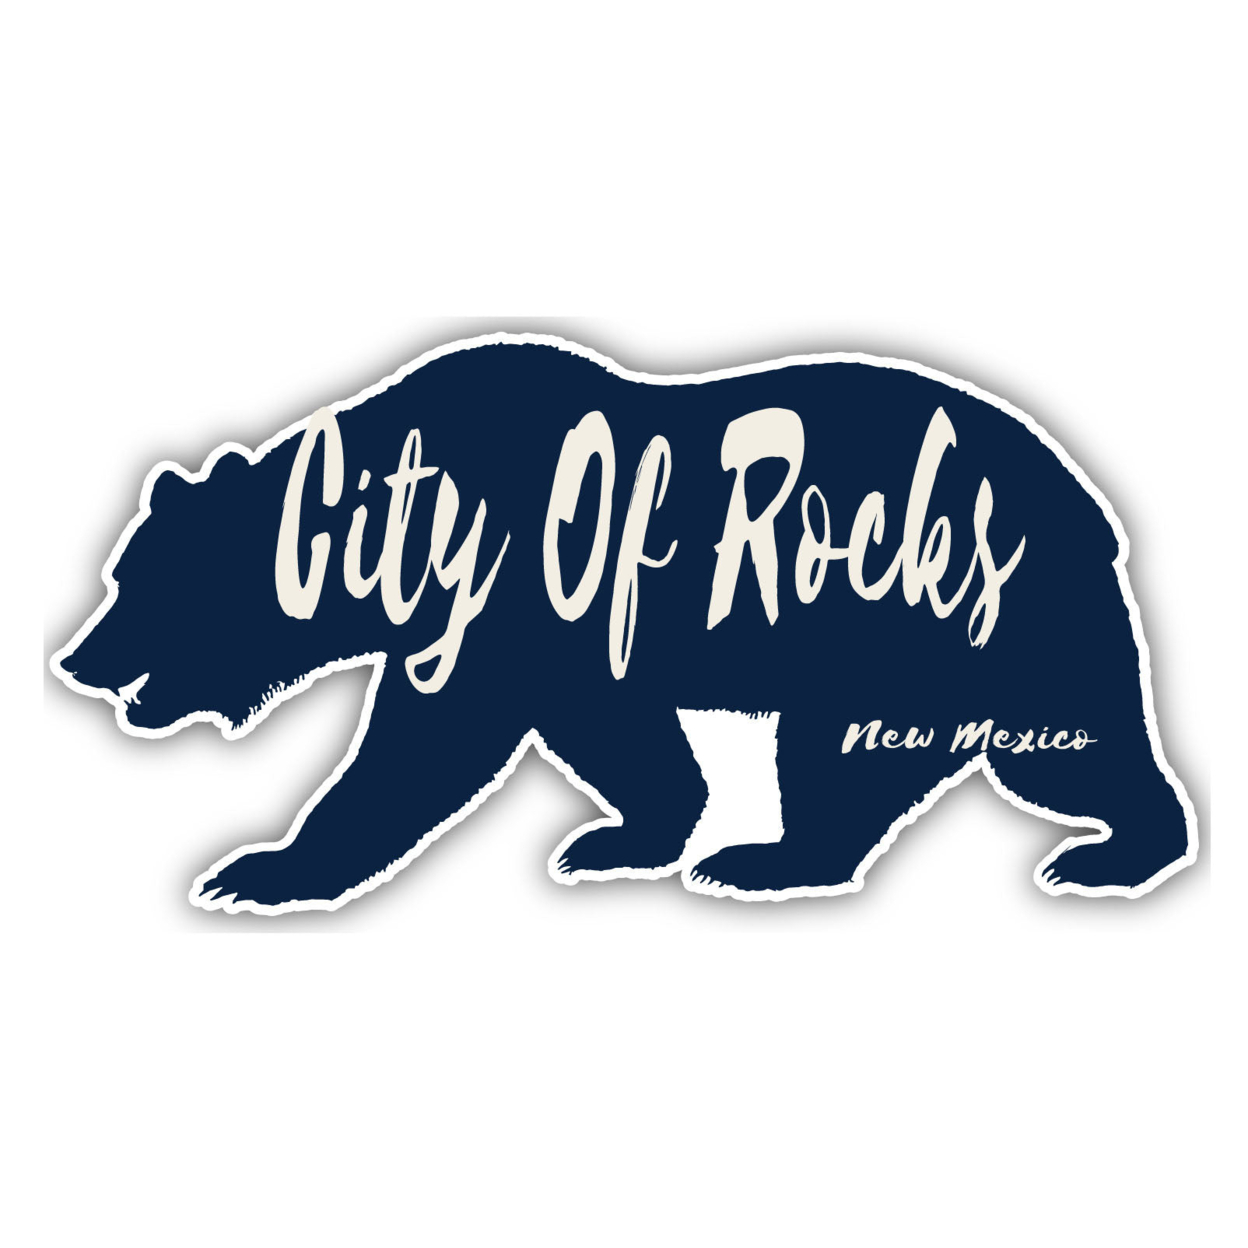 City Of Rocks New Mexico Souvenir Decorative Stickers (Choose Theme And Size) - 4-Pack, 10-Inch, Bear